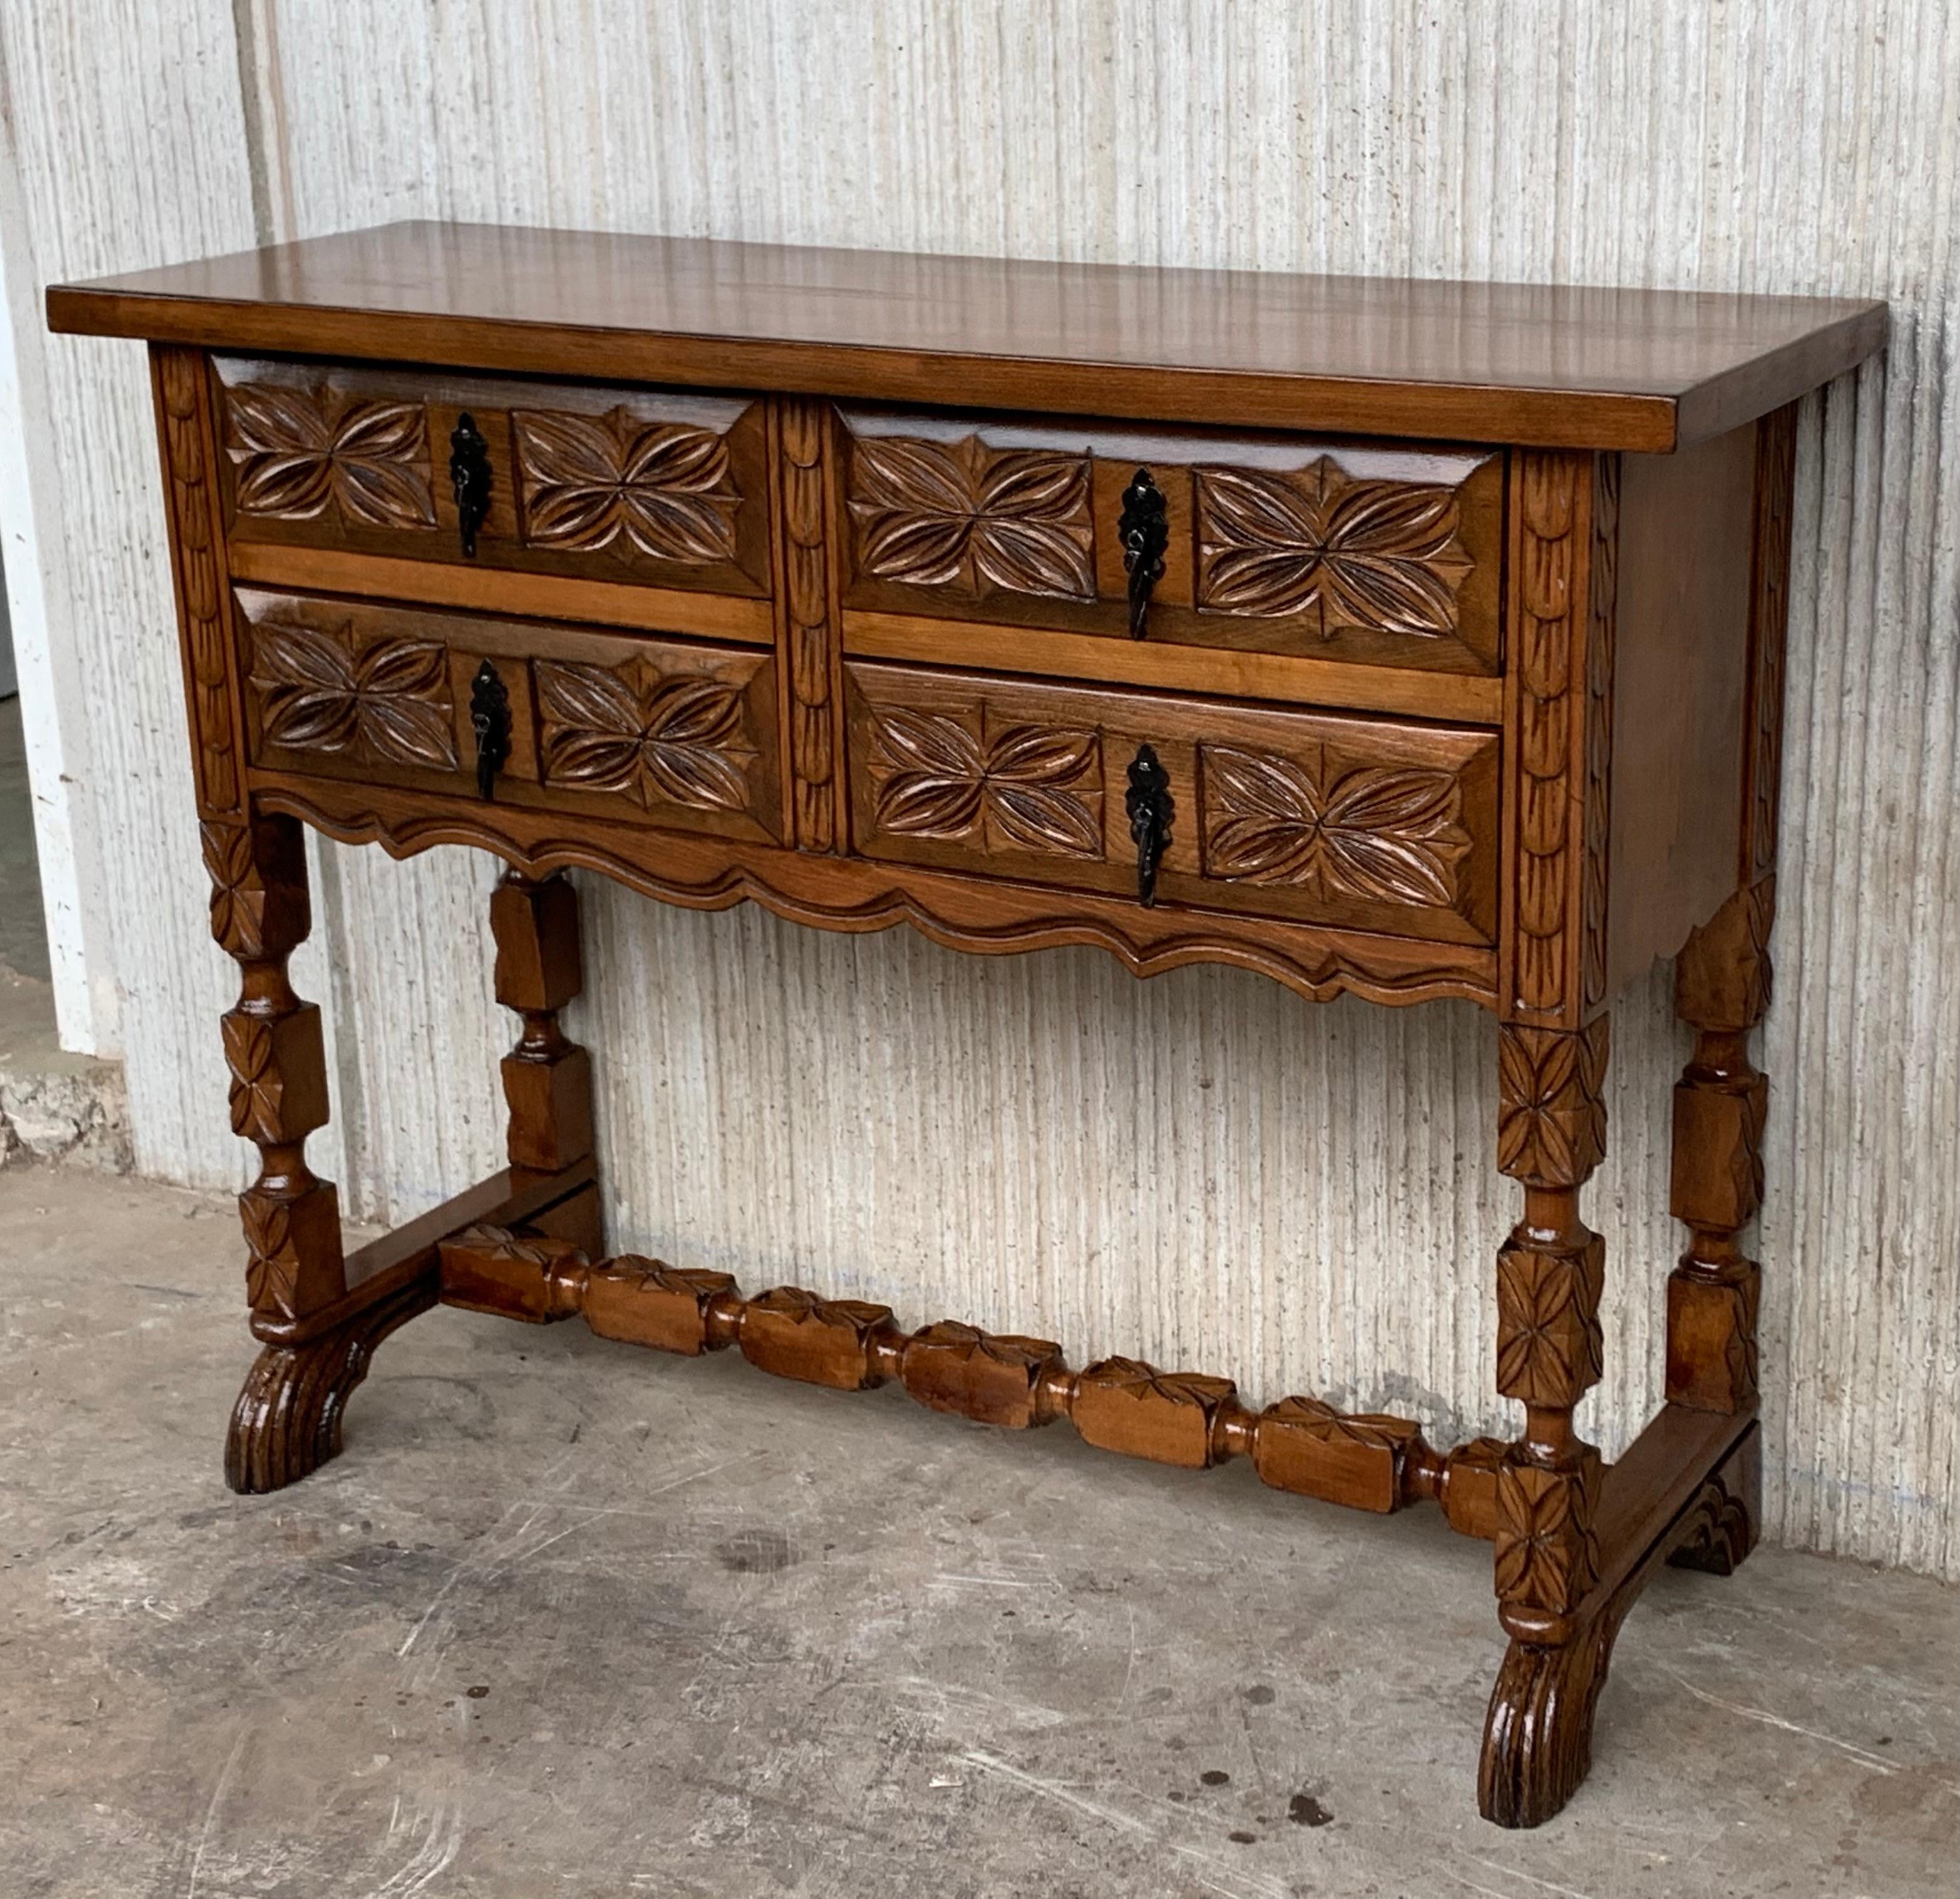 Hand-Carved 19th Century Catalan Spanish Carved Walnut Console Sofa Table, Four Drawers For Sale